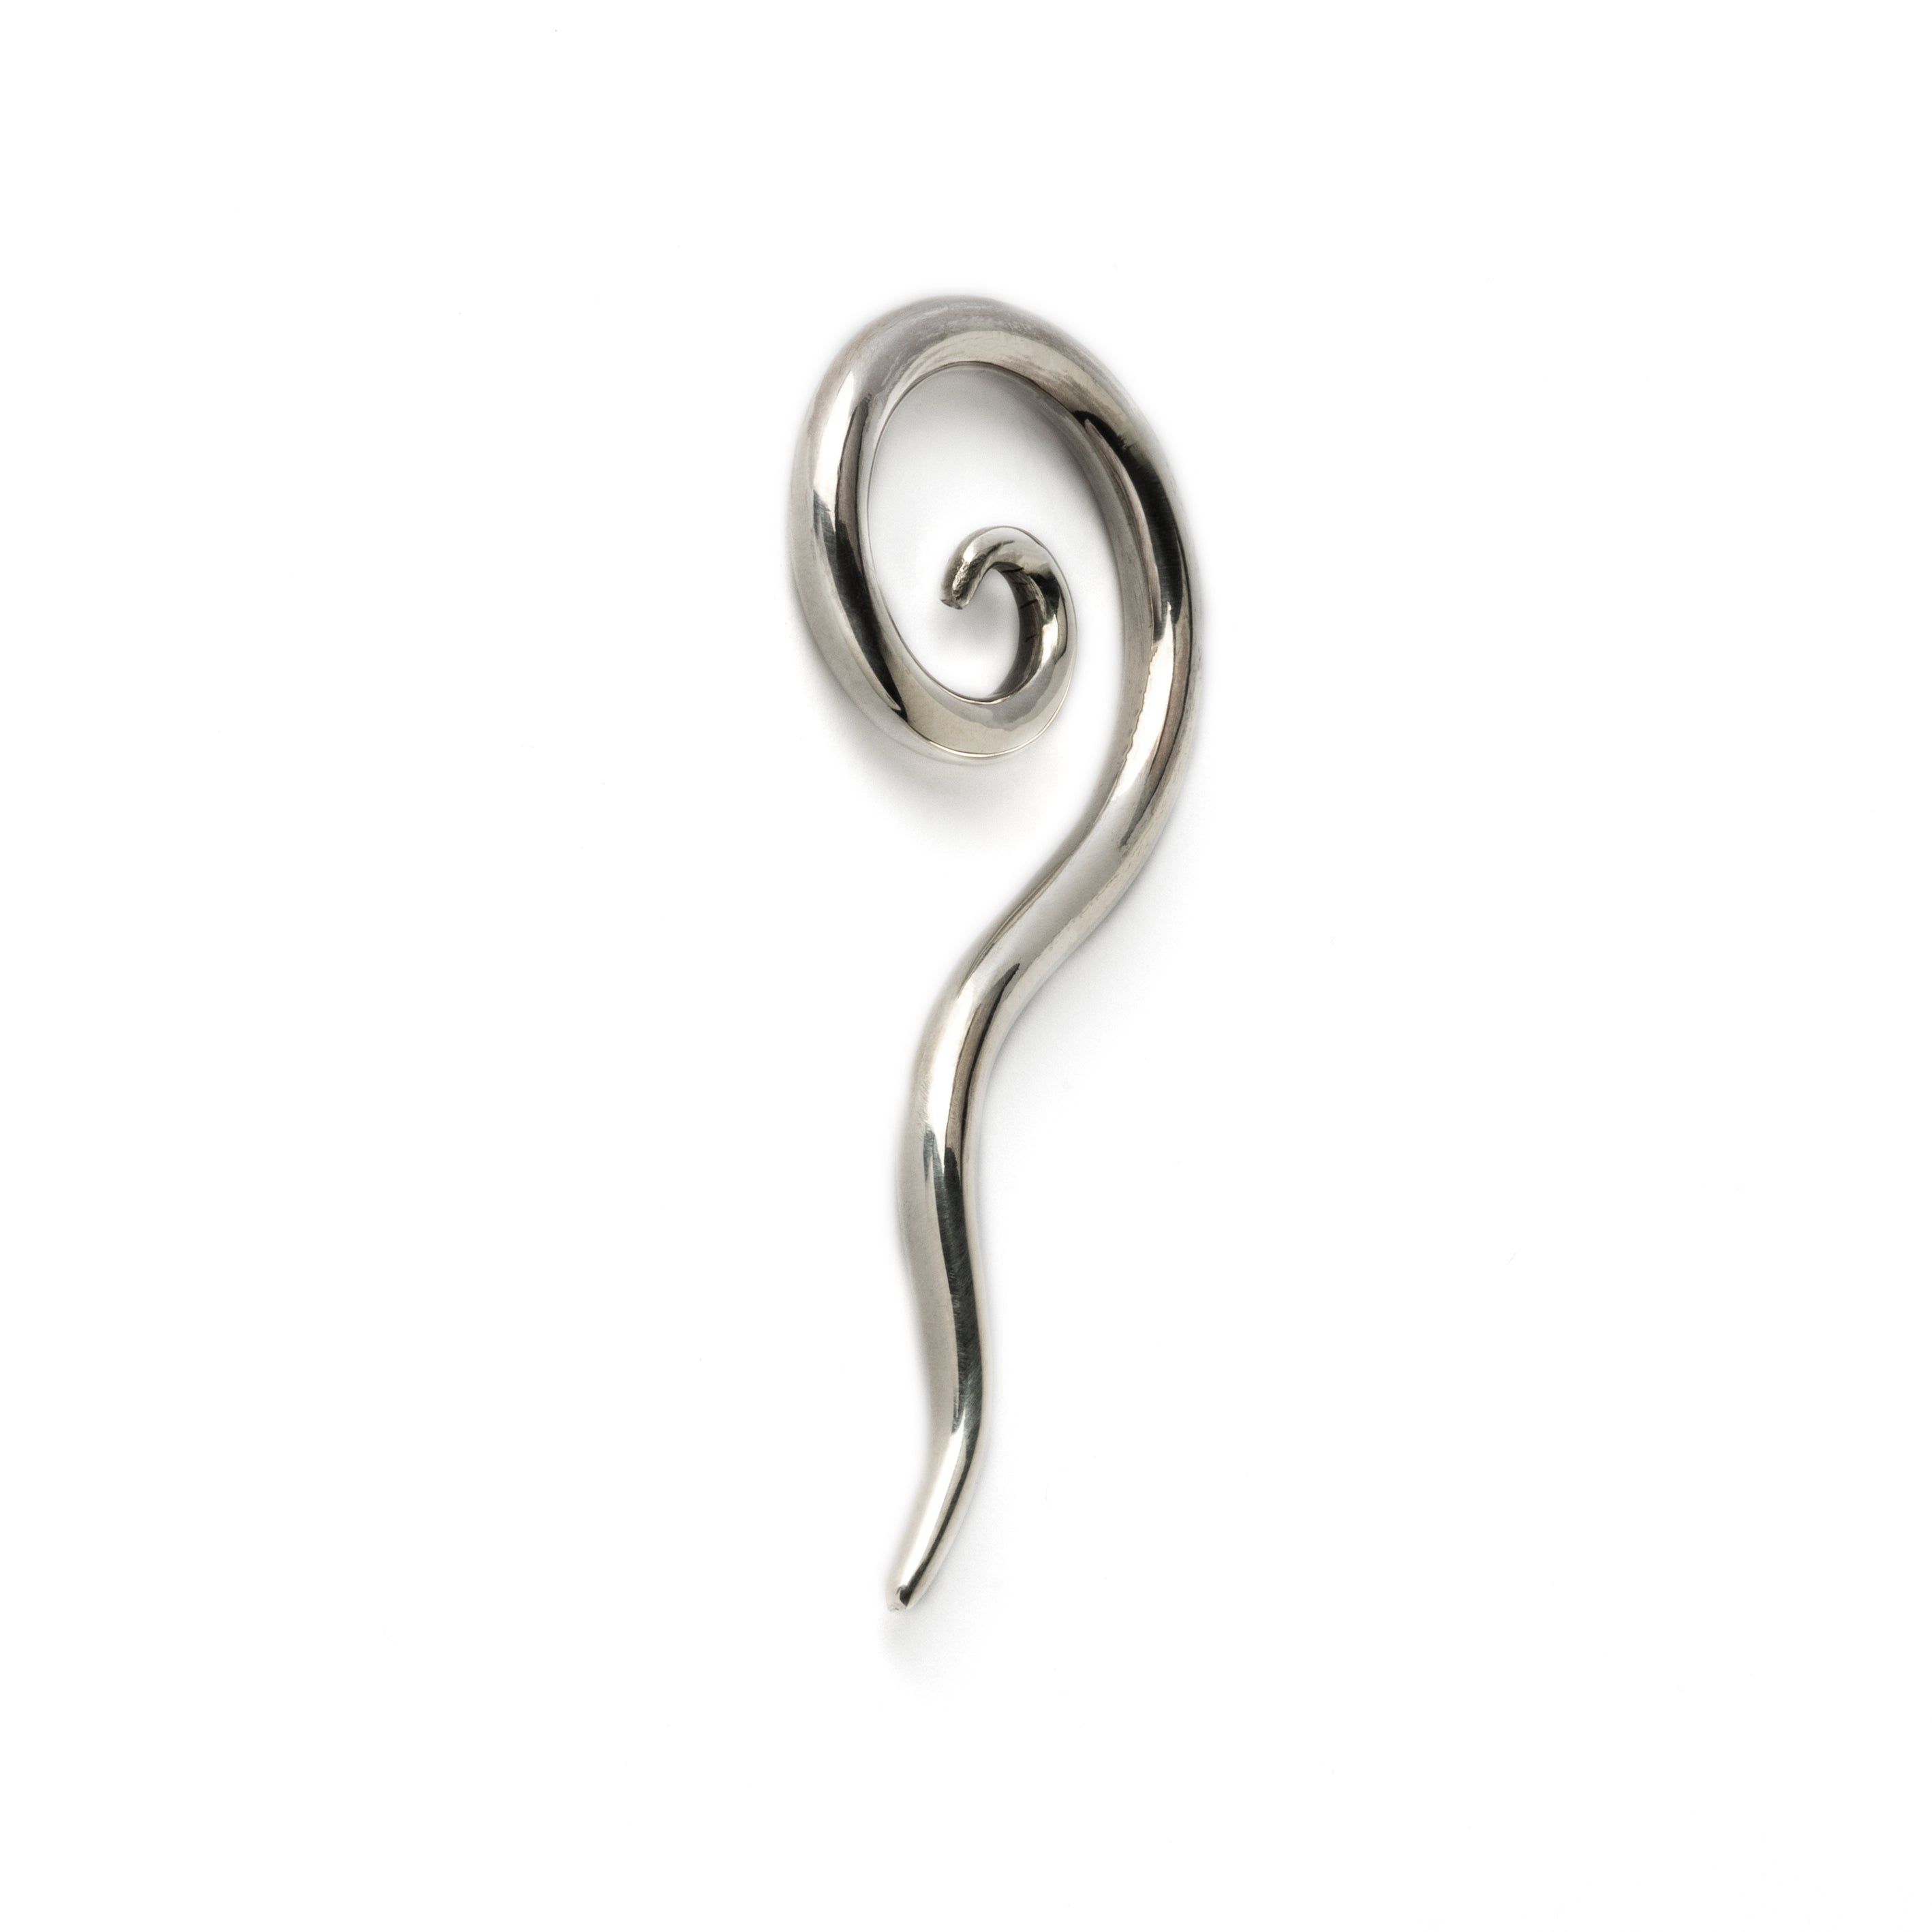 SINGLE SILVER LONG TAILED SPIRAL EAR STRETCHER HANGER FRONT VIEW